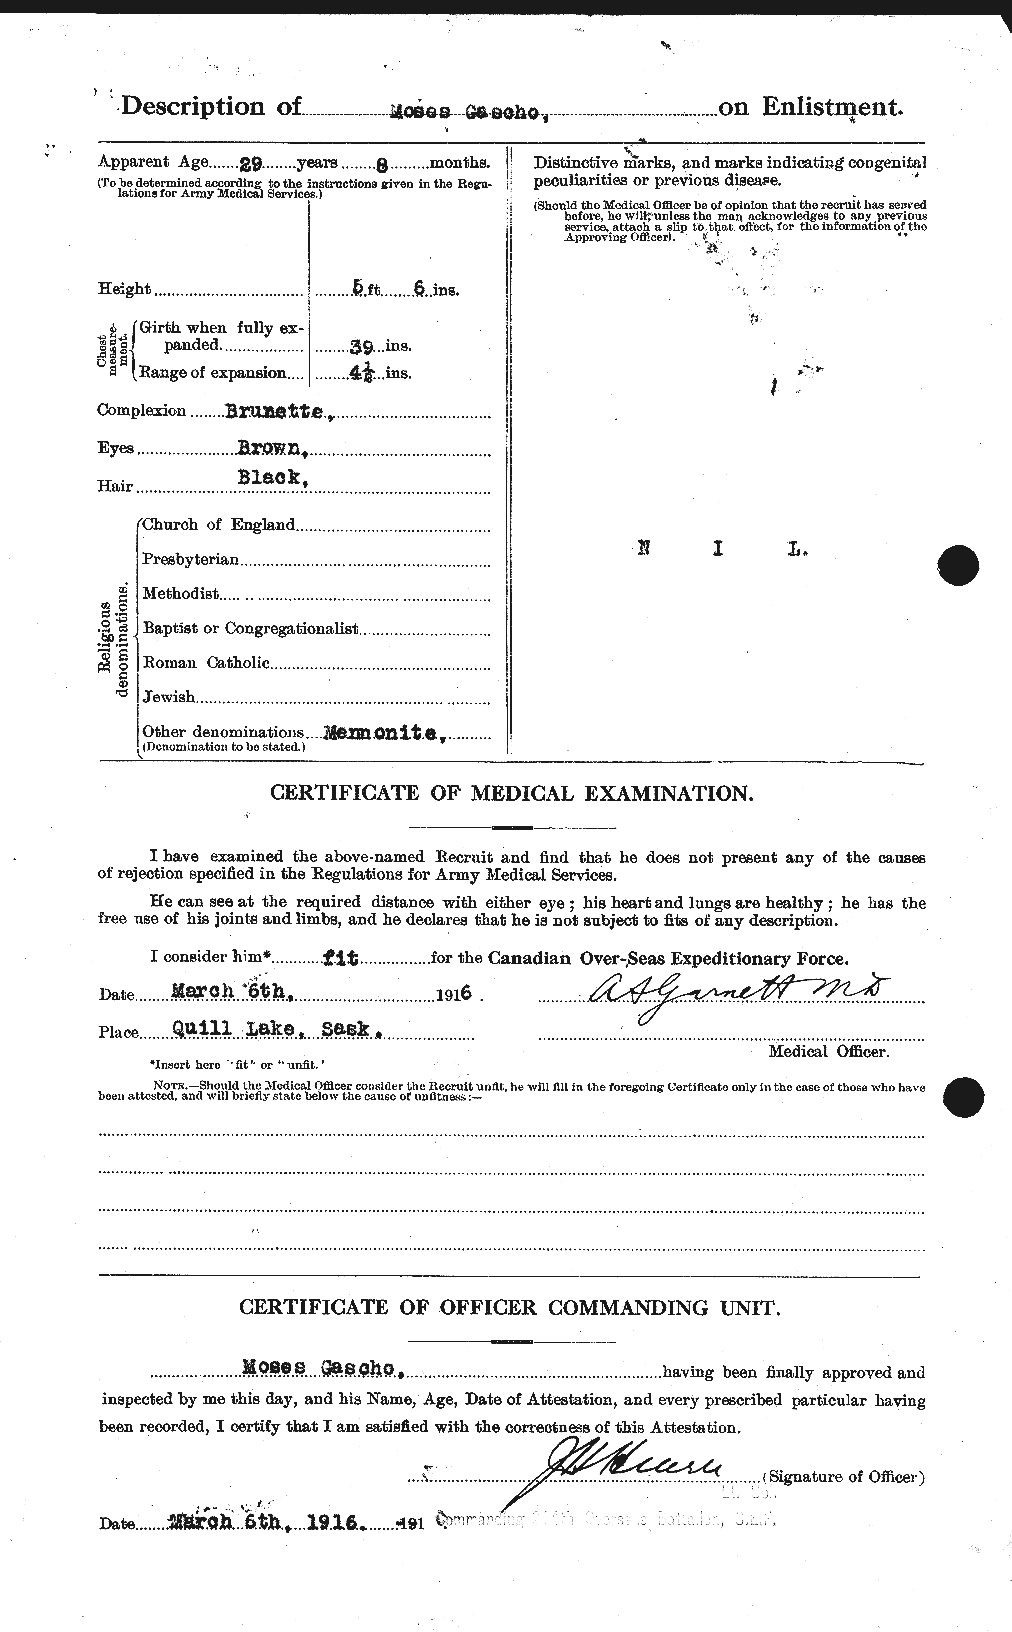 Personnel Records of the First World War - CEF 344967b